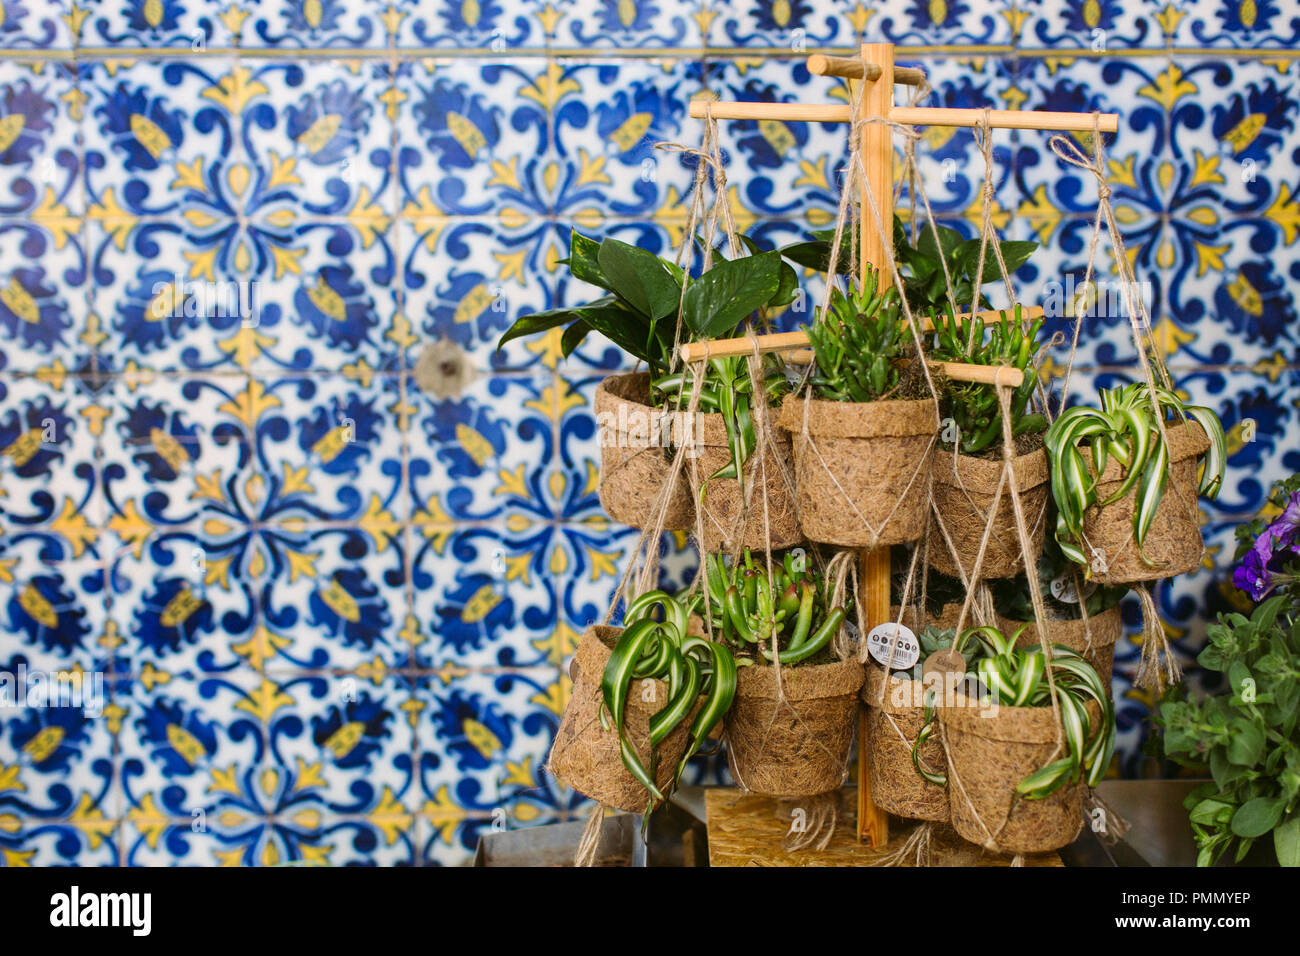 A selection of green plants (Spider plants and succulents) in fibre pots hanging up on a flower market in Madeira with patterned tiles in background Stock Photo